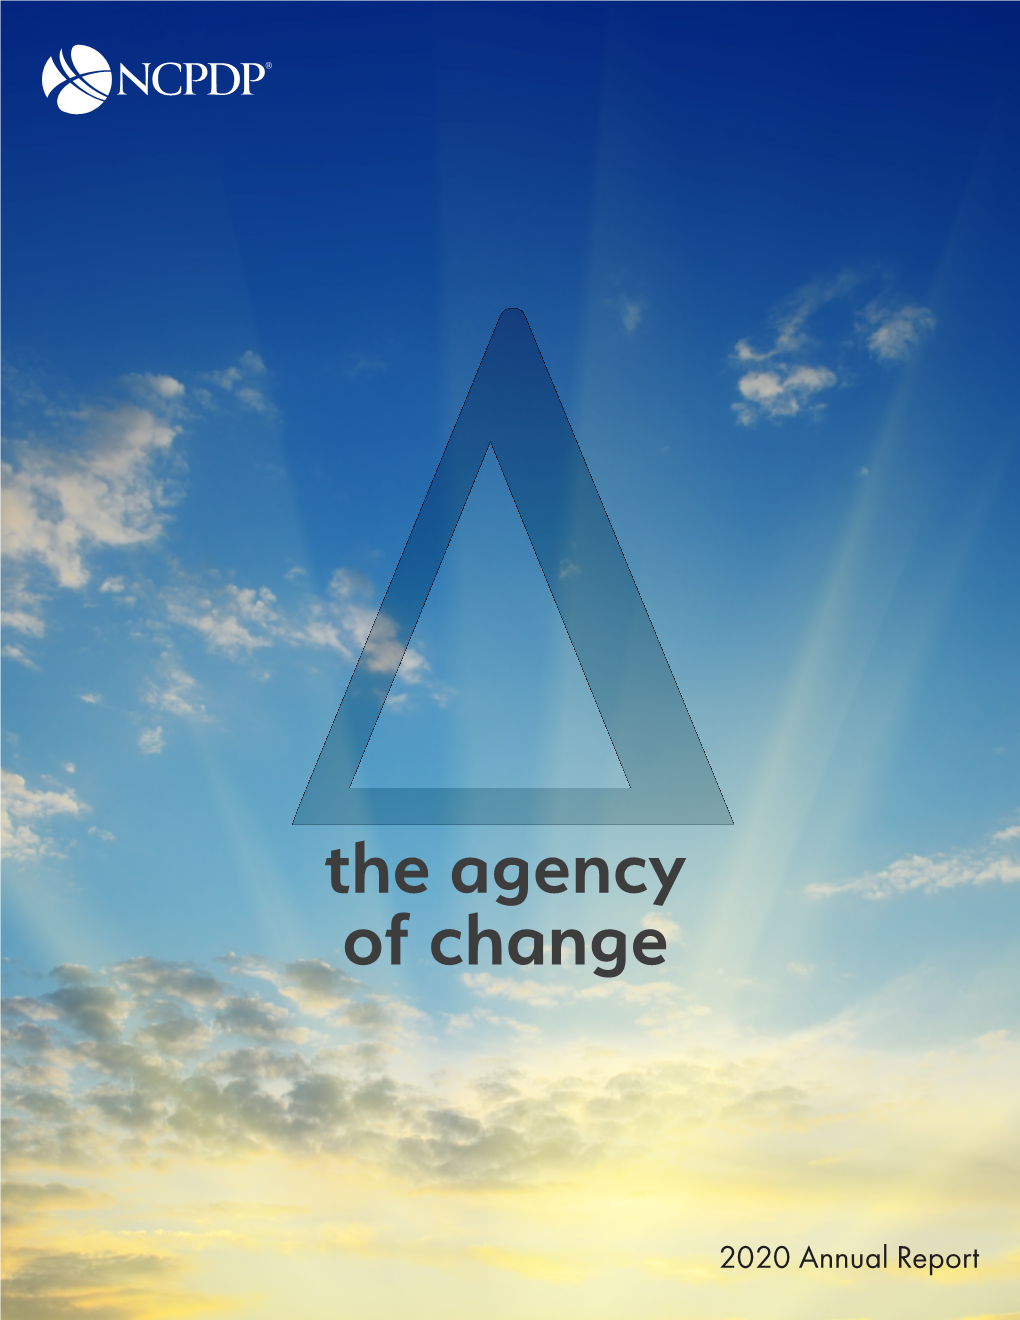 The Agency of Change VISION Lead the Industry in Healthcare Standards and Solutions for the Common Good